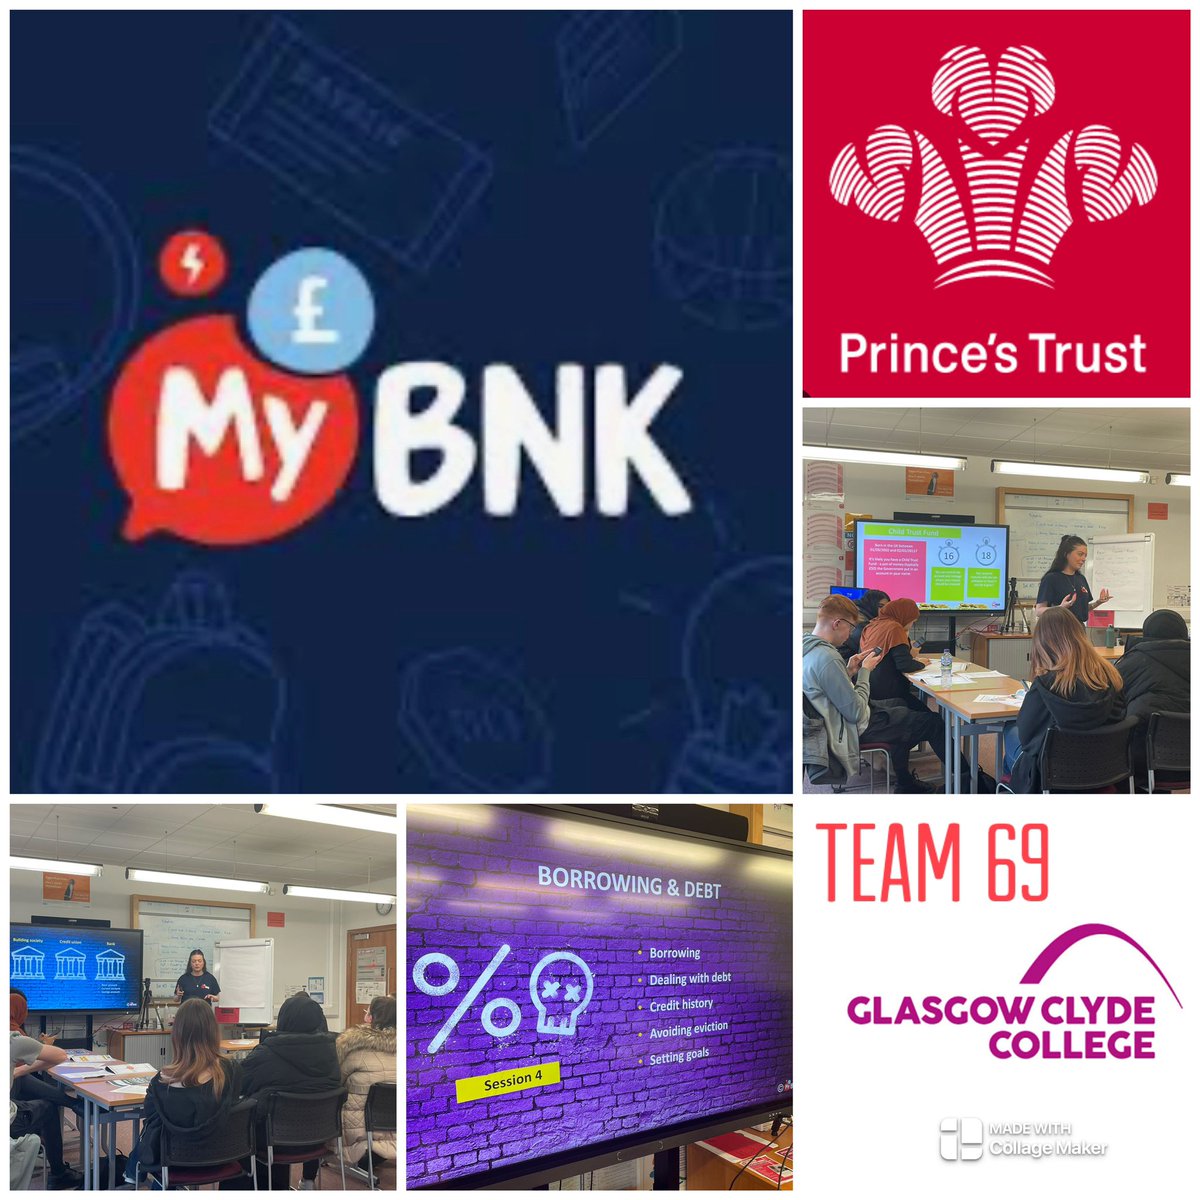 Our Prince's Trust Team 69 @Glasgow_Clyde Langside Campus complete Money Works two day course with #mybnk everything #MONEY thank you Lizzy #youcan